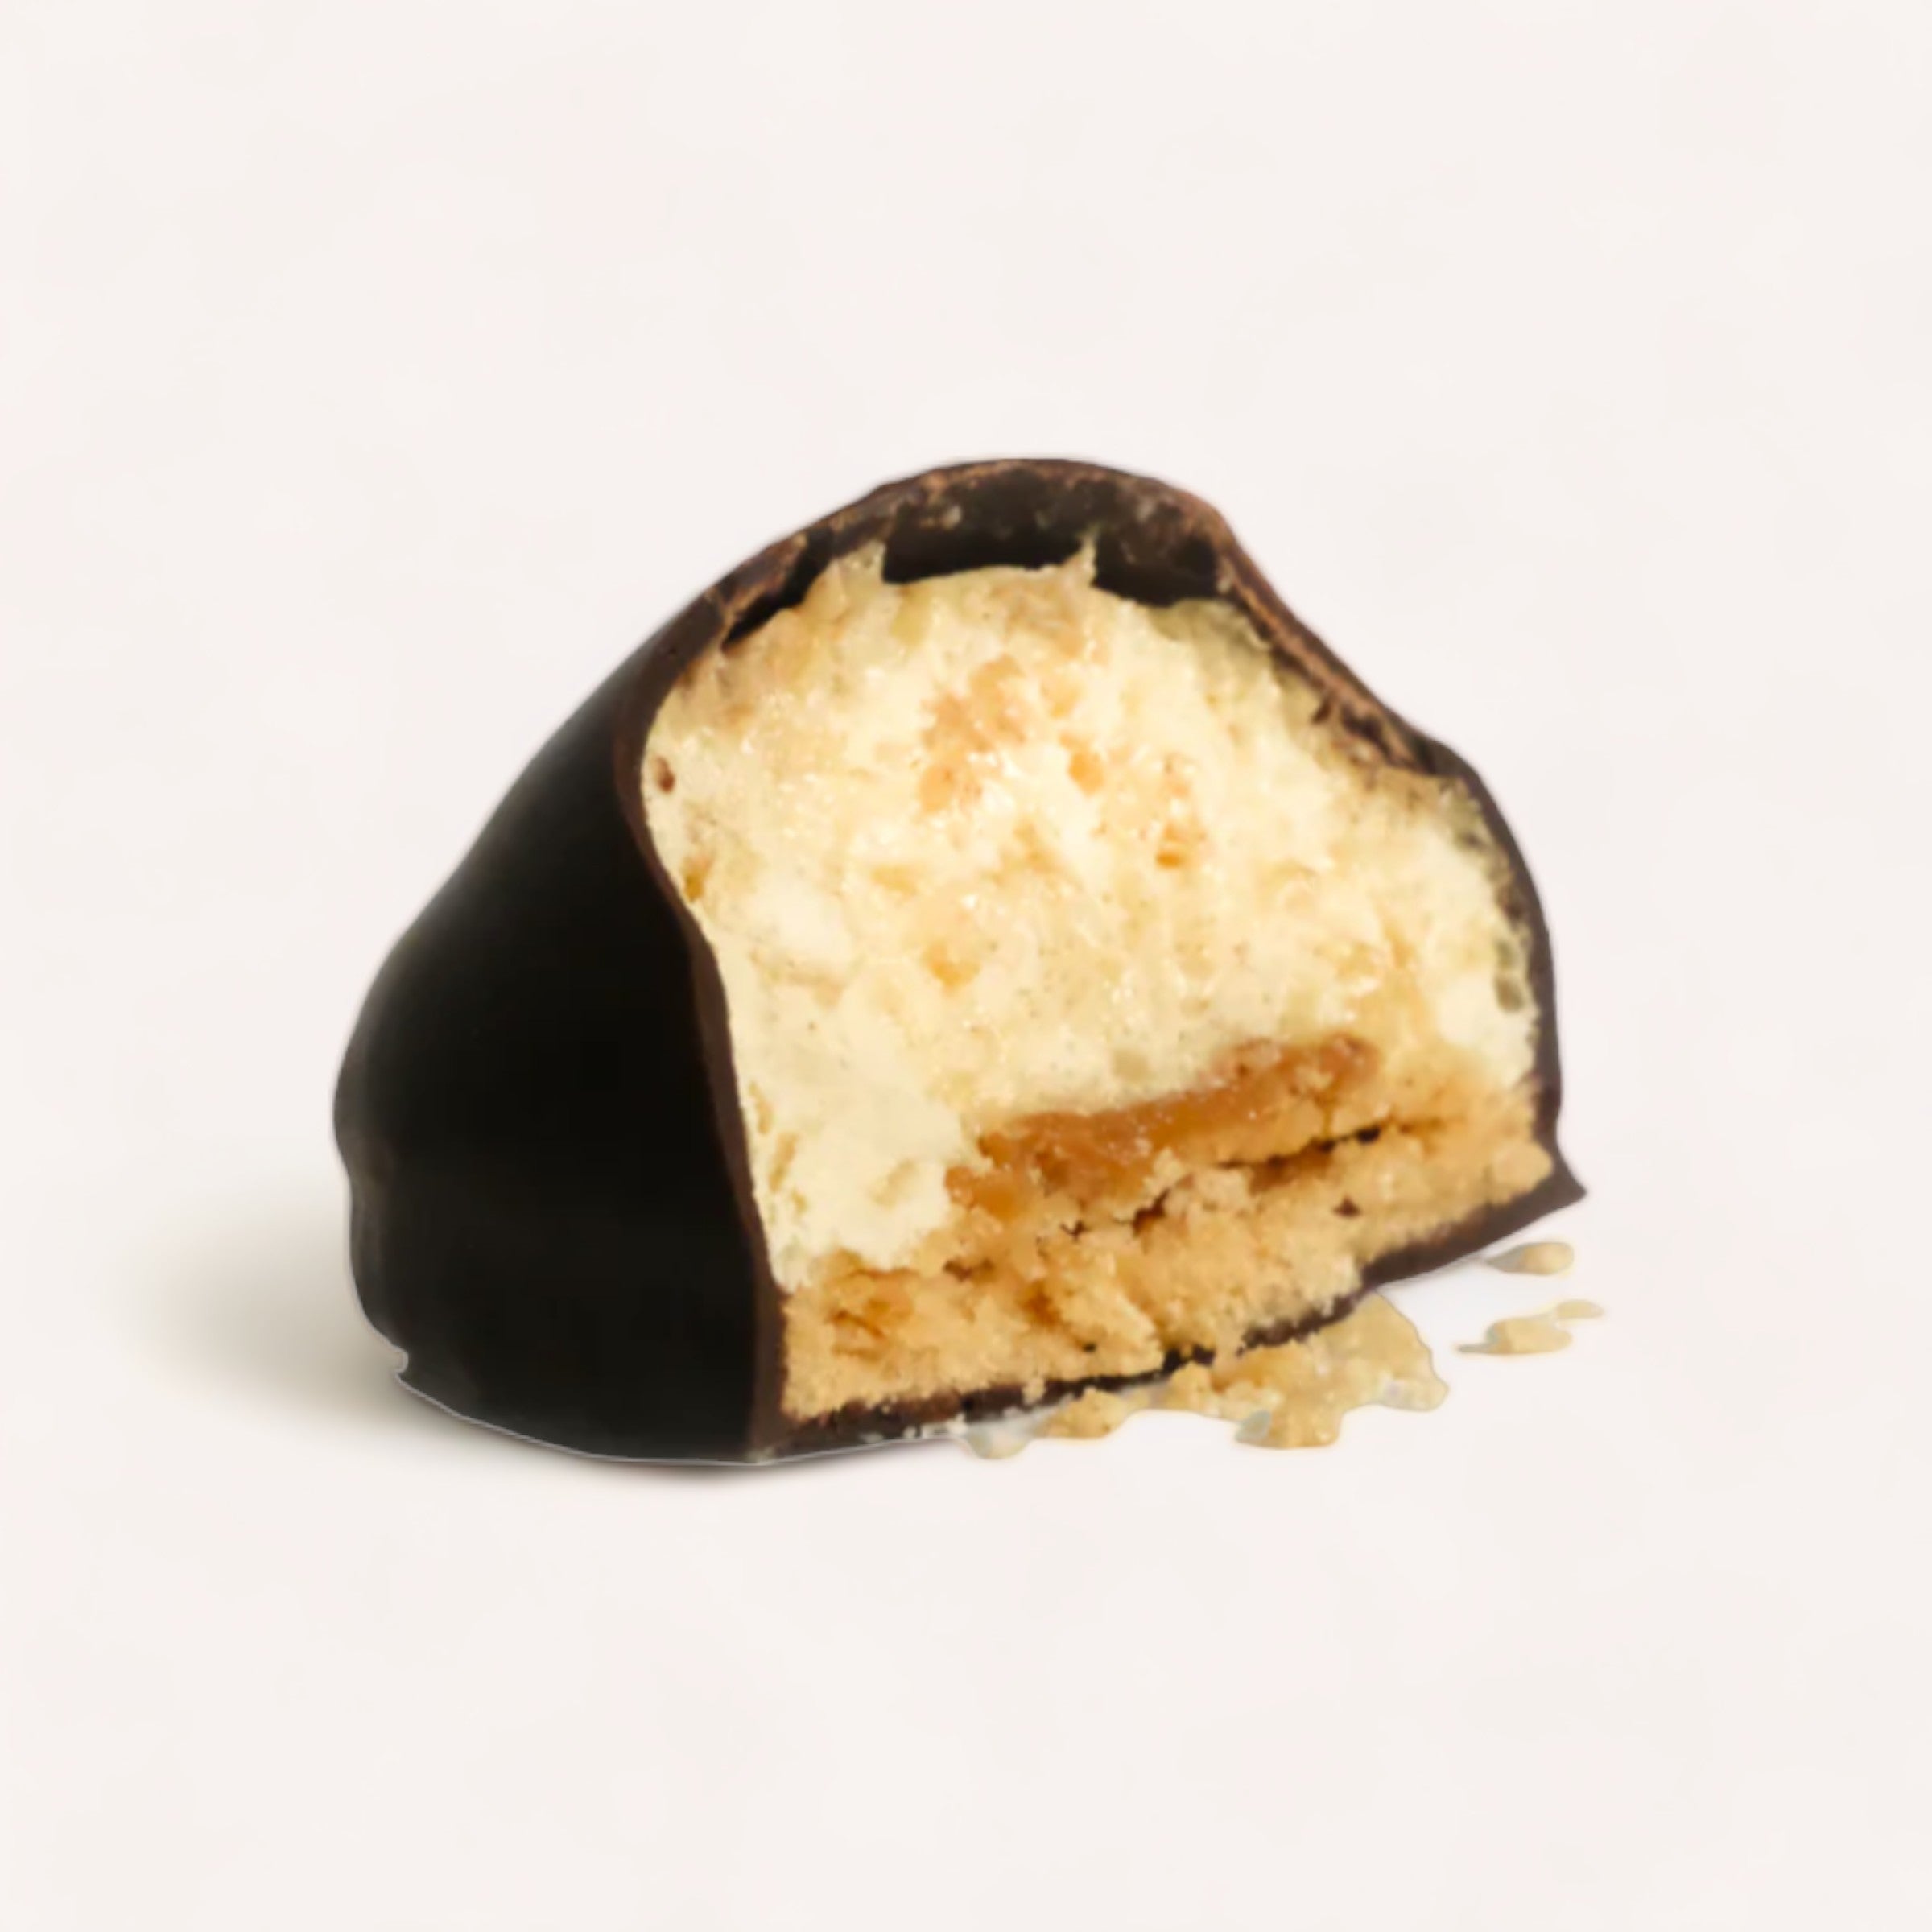 A cross section of Baron Hasselhoff's Salted Caramel Mallow Puffs, a gluten-free, chocolate-covered dessert with a layered filling, showing a gooey caramel center and soft, crumbly cookie-like layers on a plain white background.